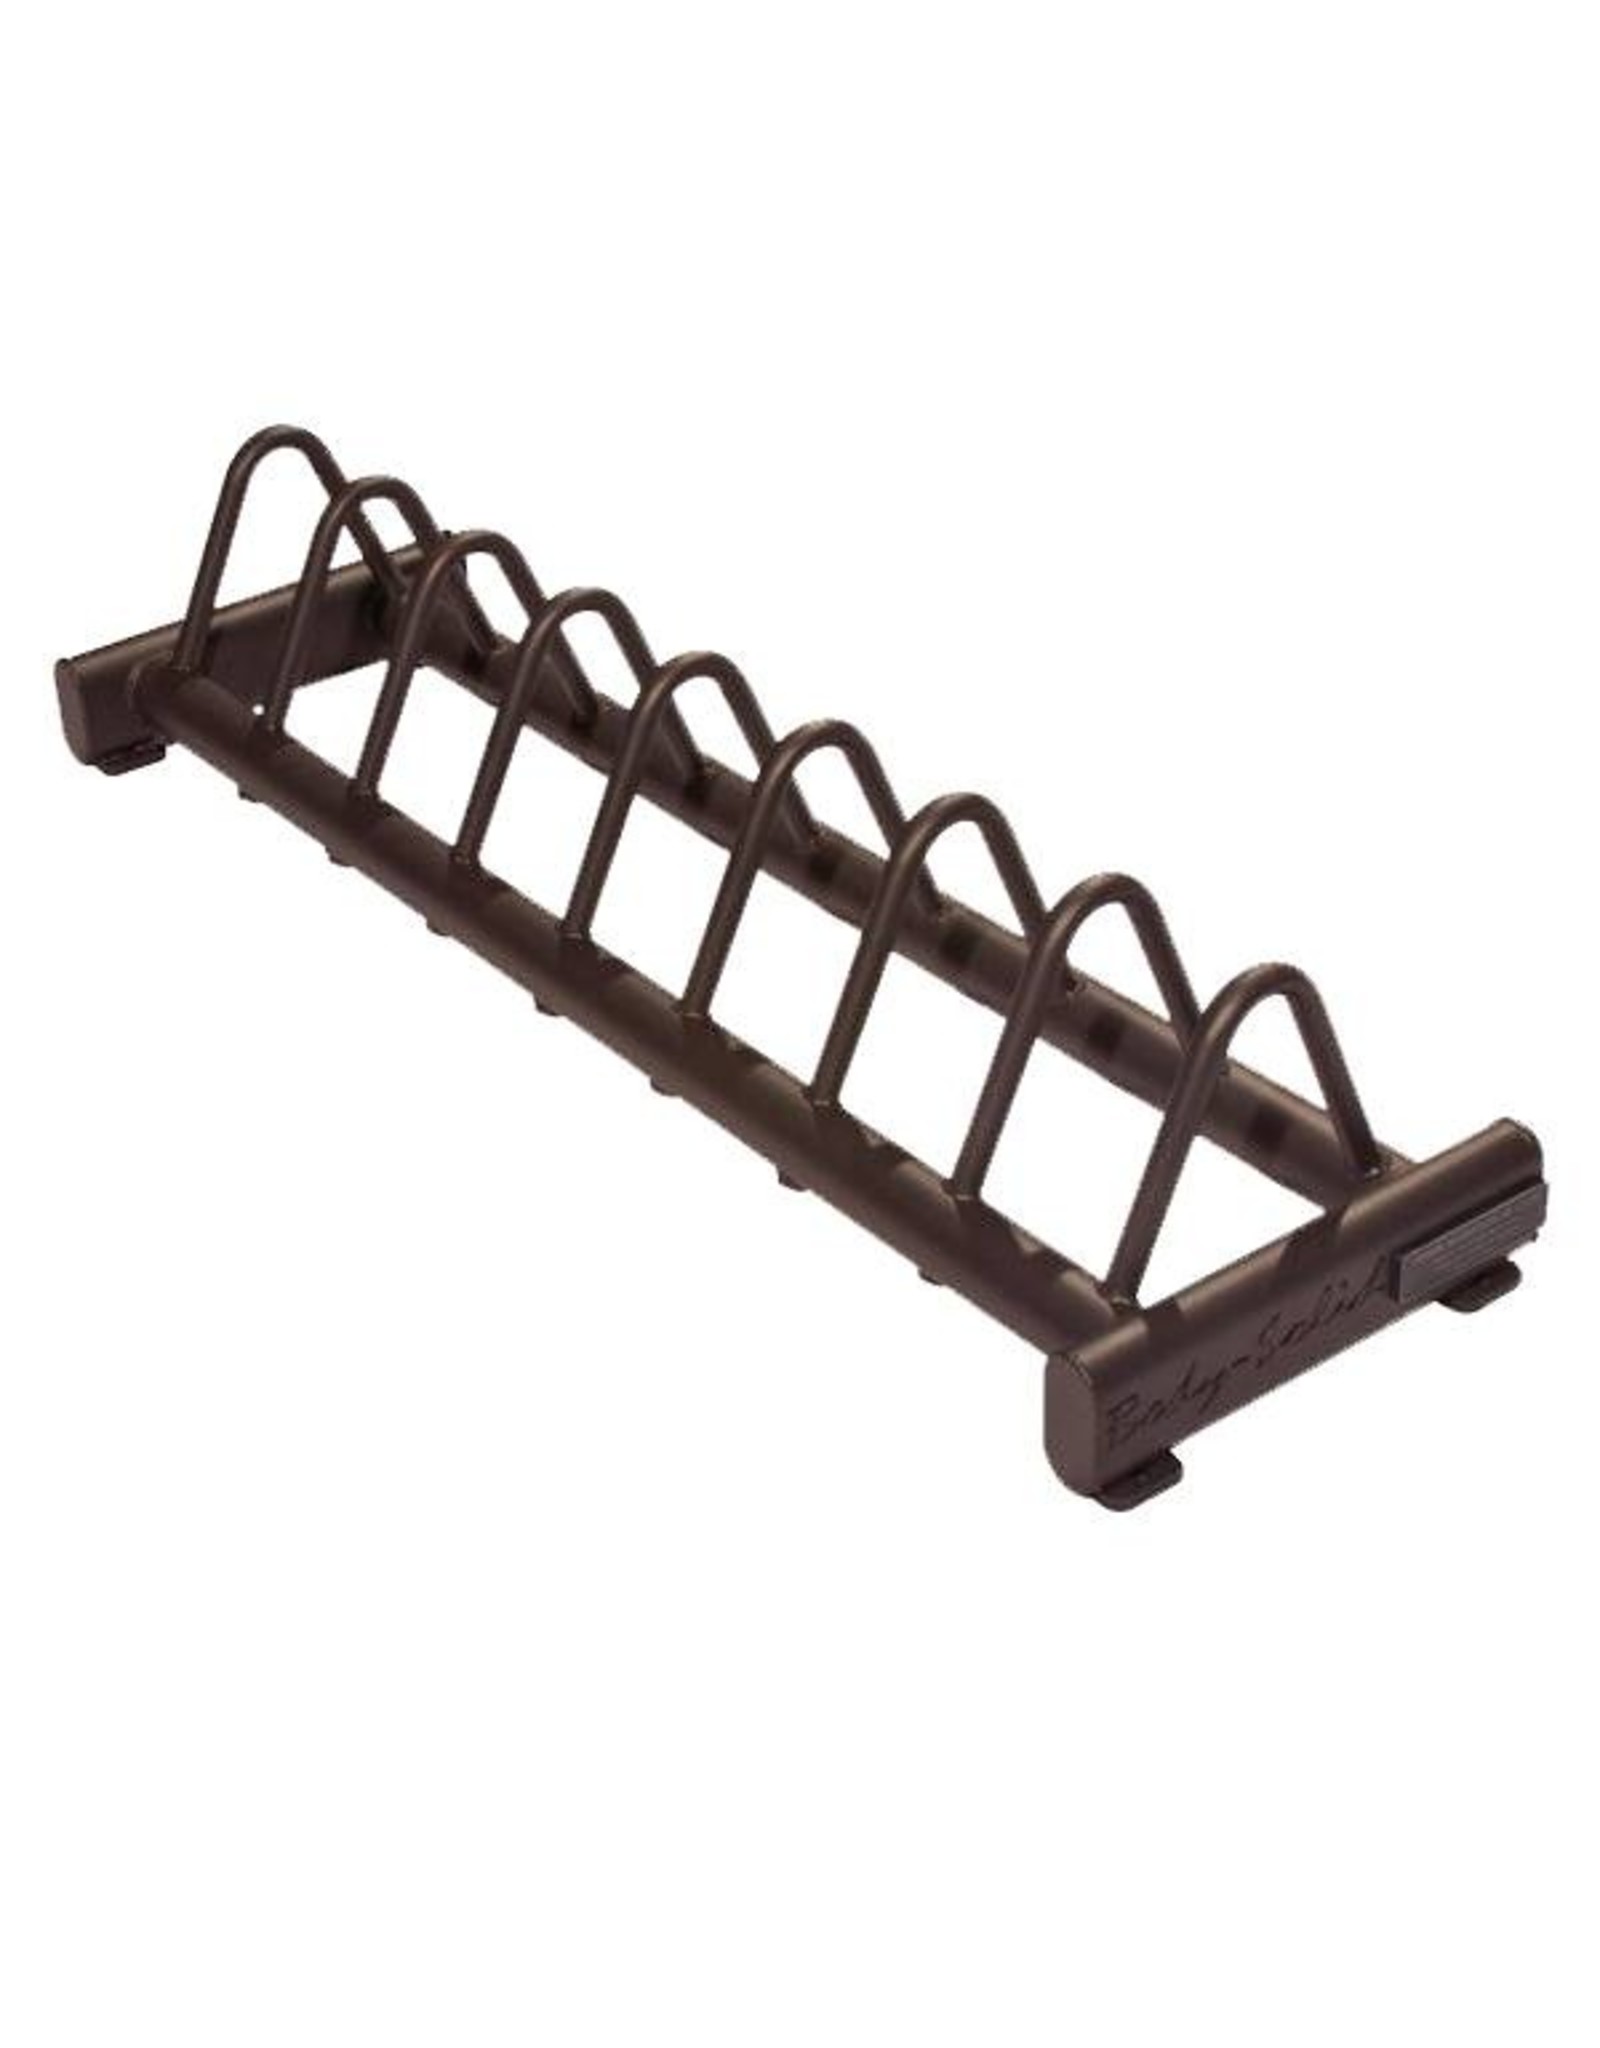 Body-Solid Body-Solid Rubber Bumper Plate Rack GBPR10